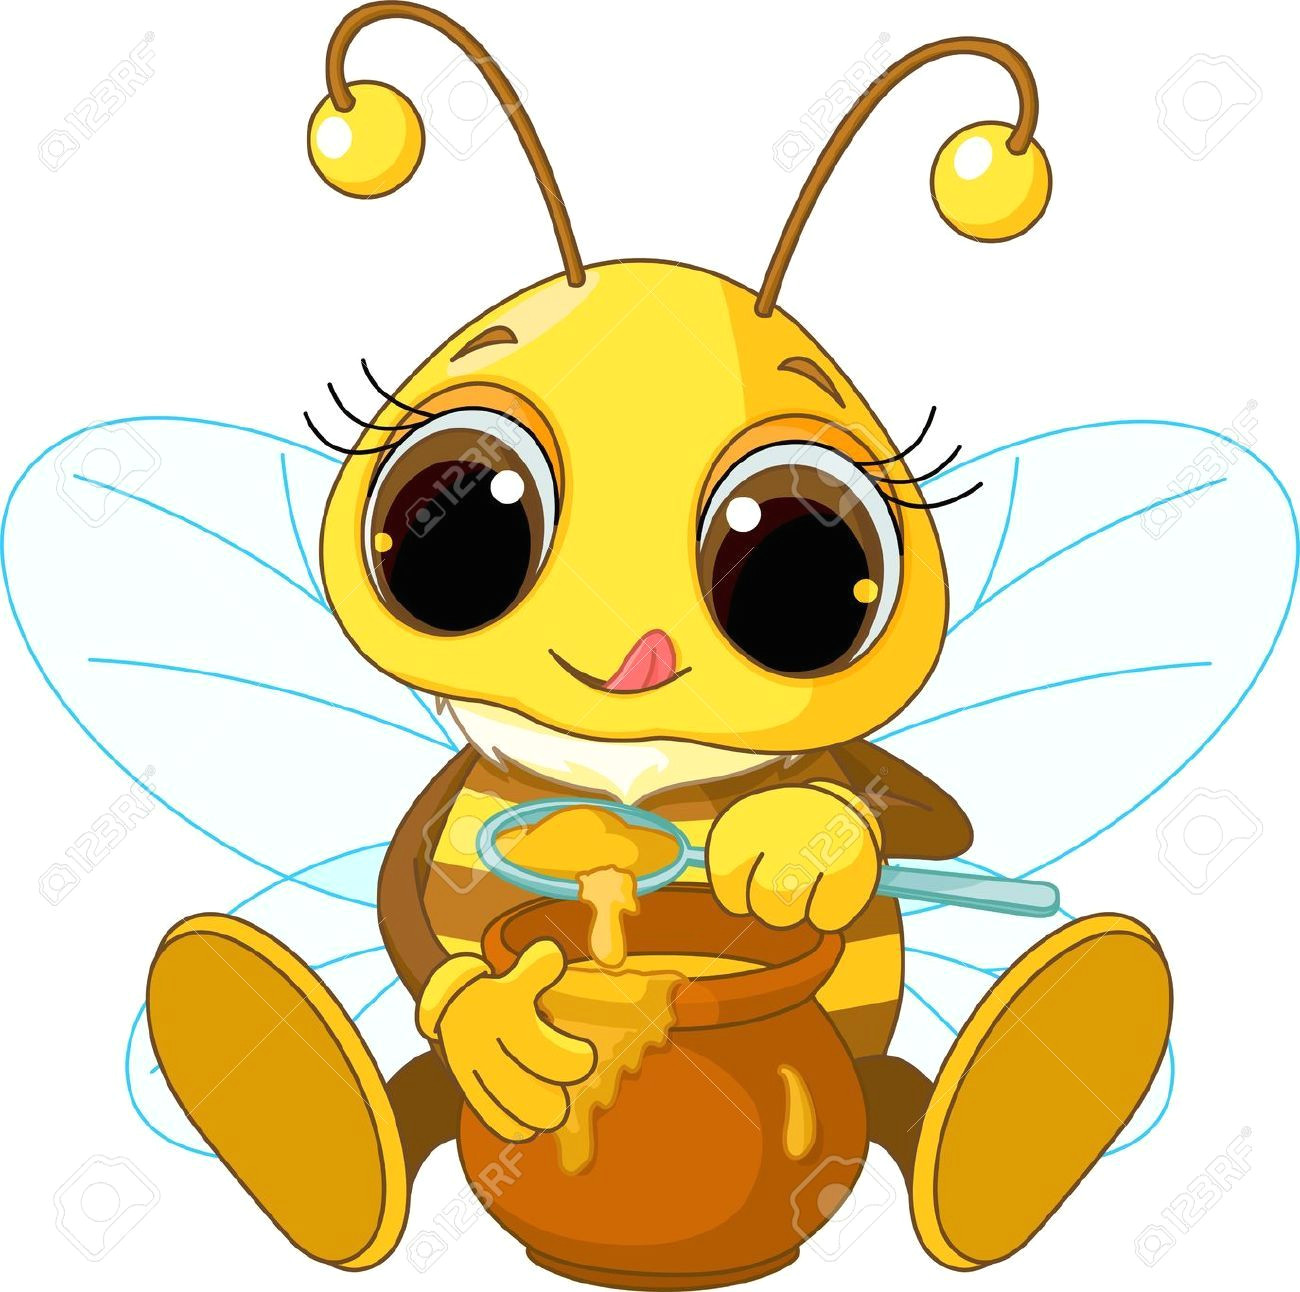 illustration of cute bee eating honey royalty free cliparts